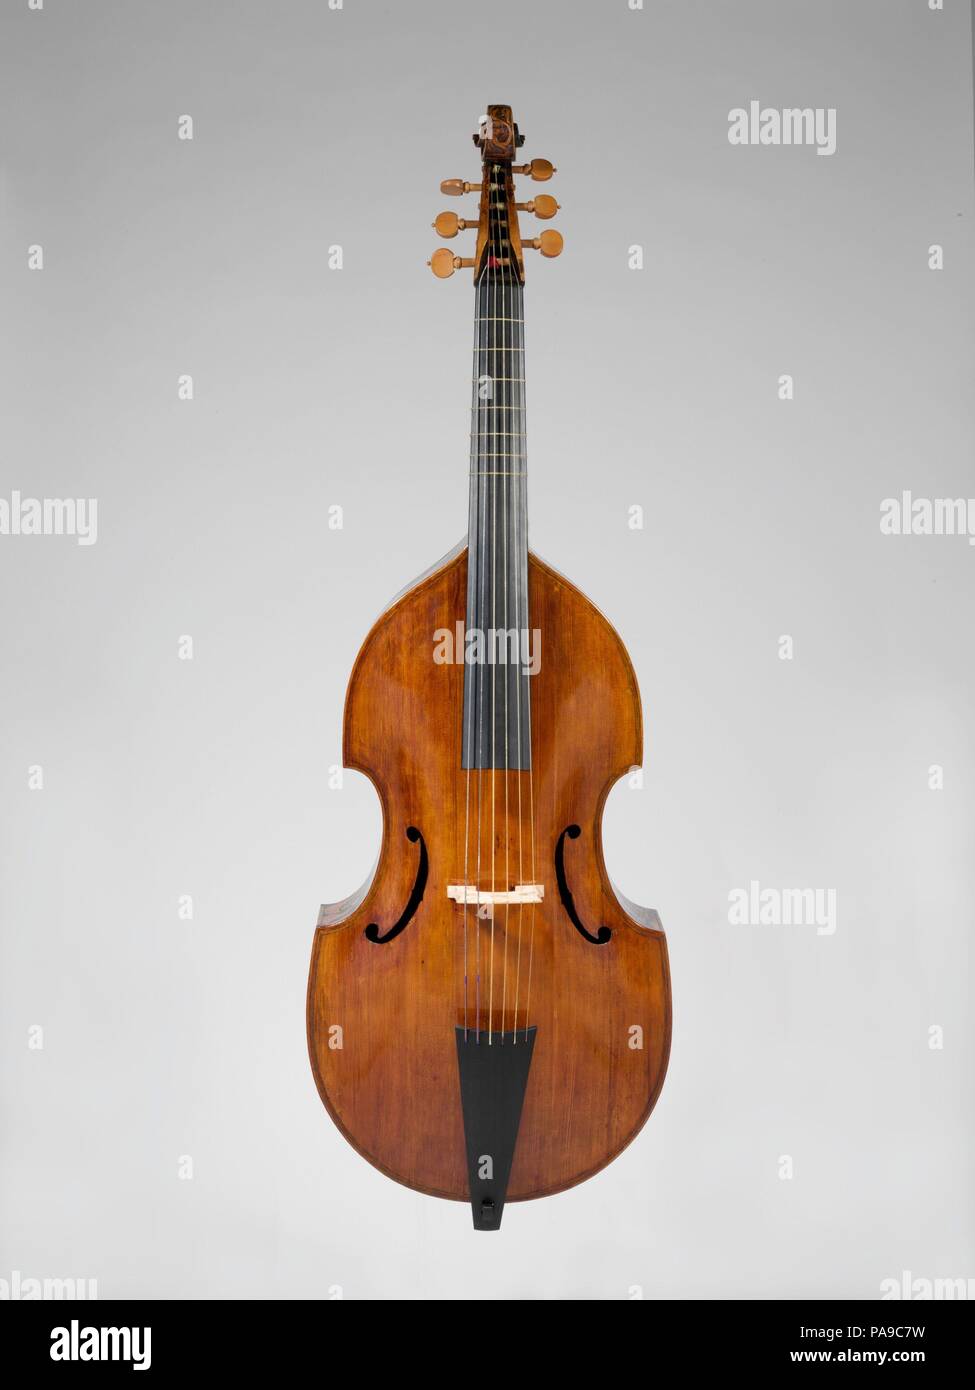 Bass Viola da Gamba. Culture: British. Dimensions: Total L.: 119.5 cm (47-1/16 in.); Body L.: 71.5 cm  (28-3/16 in.); Body W.: upper 32 cm (12-1/2 in.), middle 23.4 cm (9-3/16 in.), lower 39 cm (15-1/8 in.); Rib H.: upper  9 cm (3-5/8 in.), middle 23.4 cm (9-3/16 in.), middle 12.6 cm  (4-15/16 in.); Belly W.: at the neck 5.2 cm (2.05 in.)  lower  39 cm (15.35 in.)lower:  12.7 cm  (5.0 in.)   Belly W. at the neck  5.2 cm (2.05 in.). Former Attribution: John Rose (English, active 1552-61). Date: ca. 1600.  Most surviving viols signed by or attributed to John Rose were likely made by the youn Stock Photo